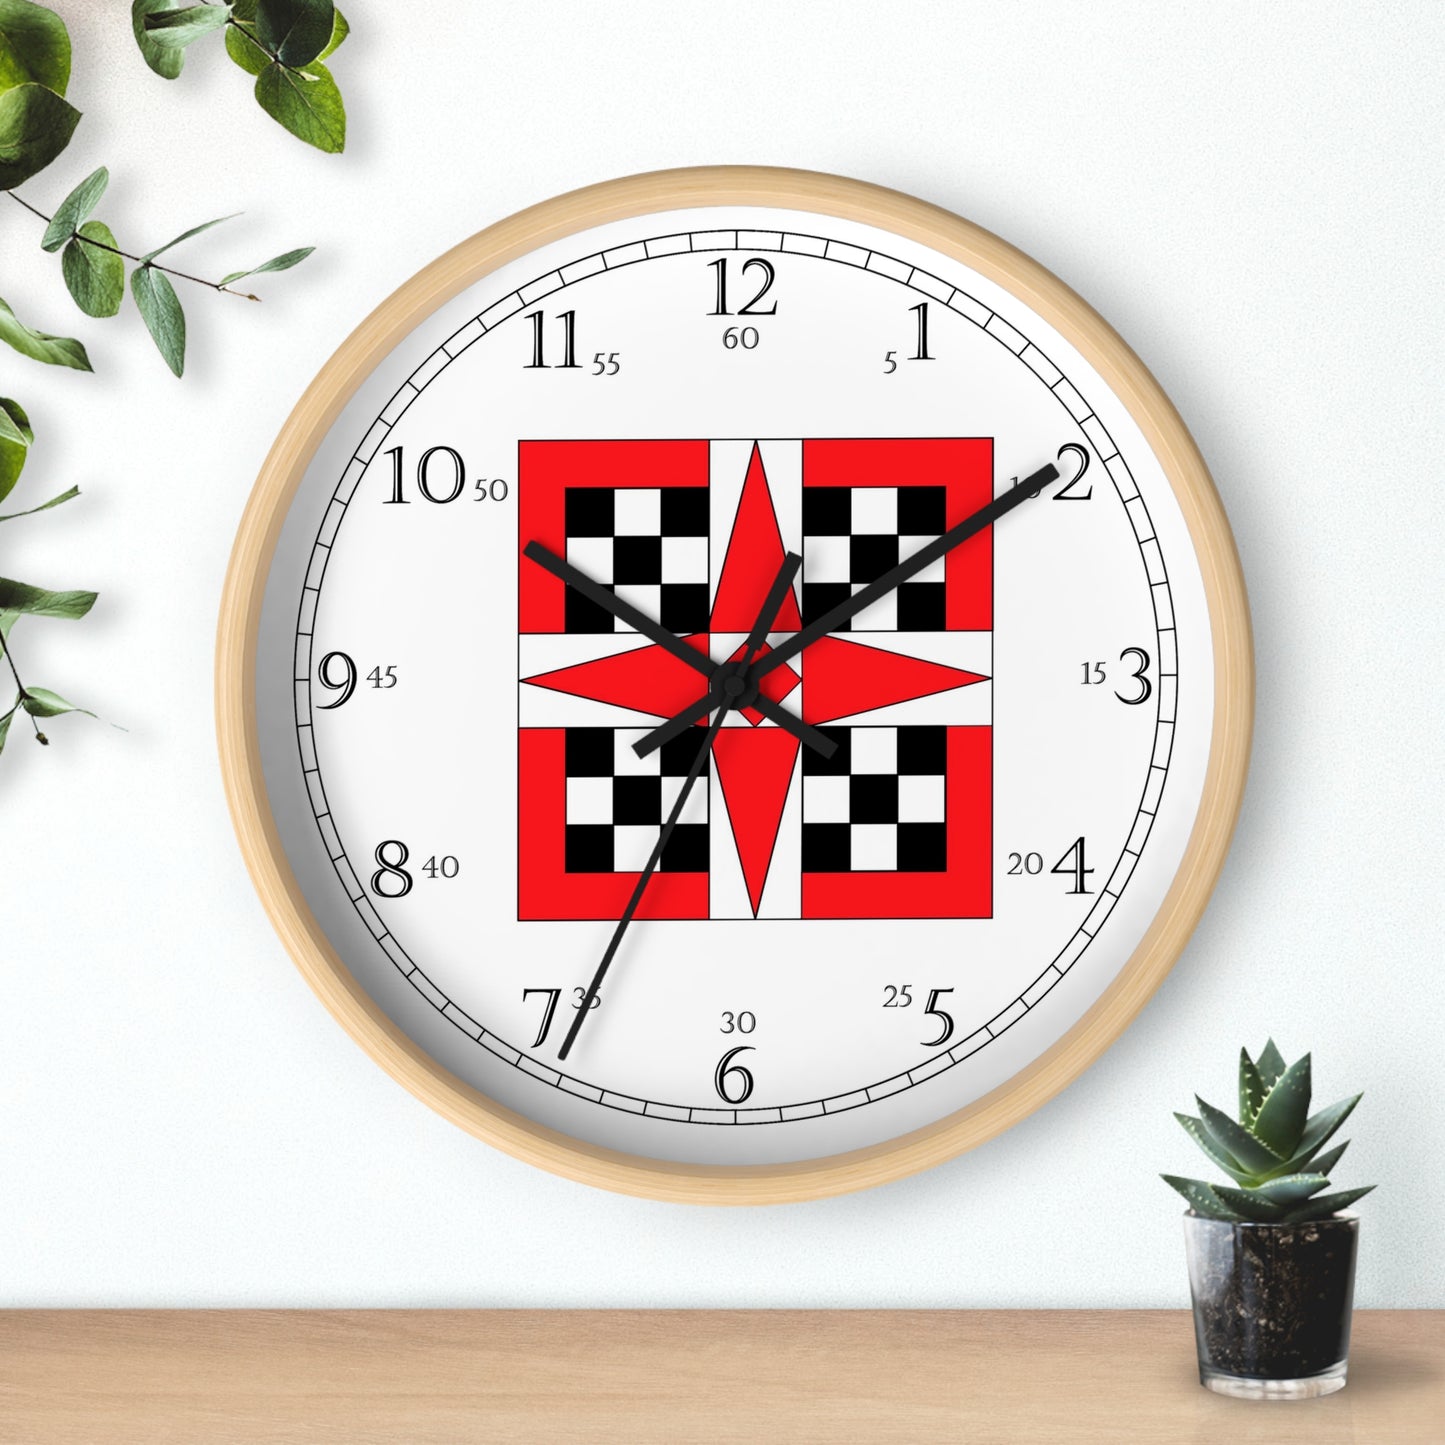 The Waverly Star Quilt Design English Numeral Clock is a reproduction of a fine art design by artist Lee M. Buchanan. This pattern style is usually listed in the Five Patch Quilt Pattern group. If you love to quilt or appreciate the style and craftsmanship involved, this clock will add a special touch to a favorite room in your home!